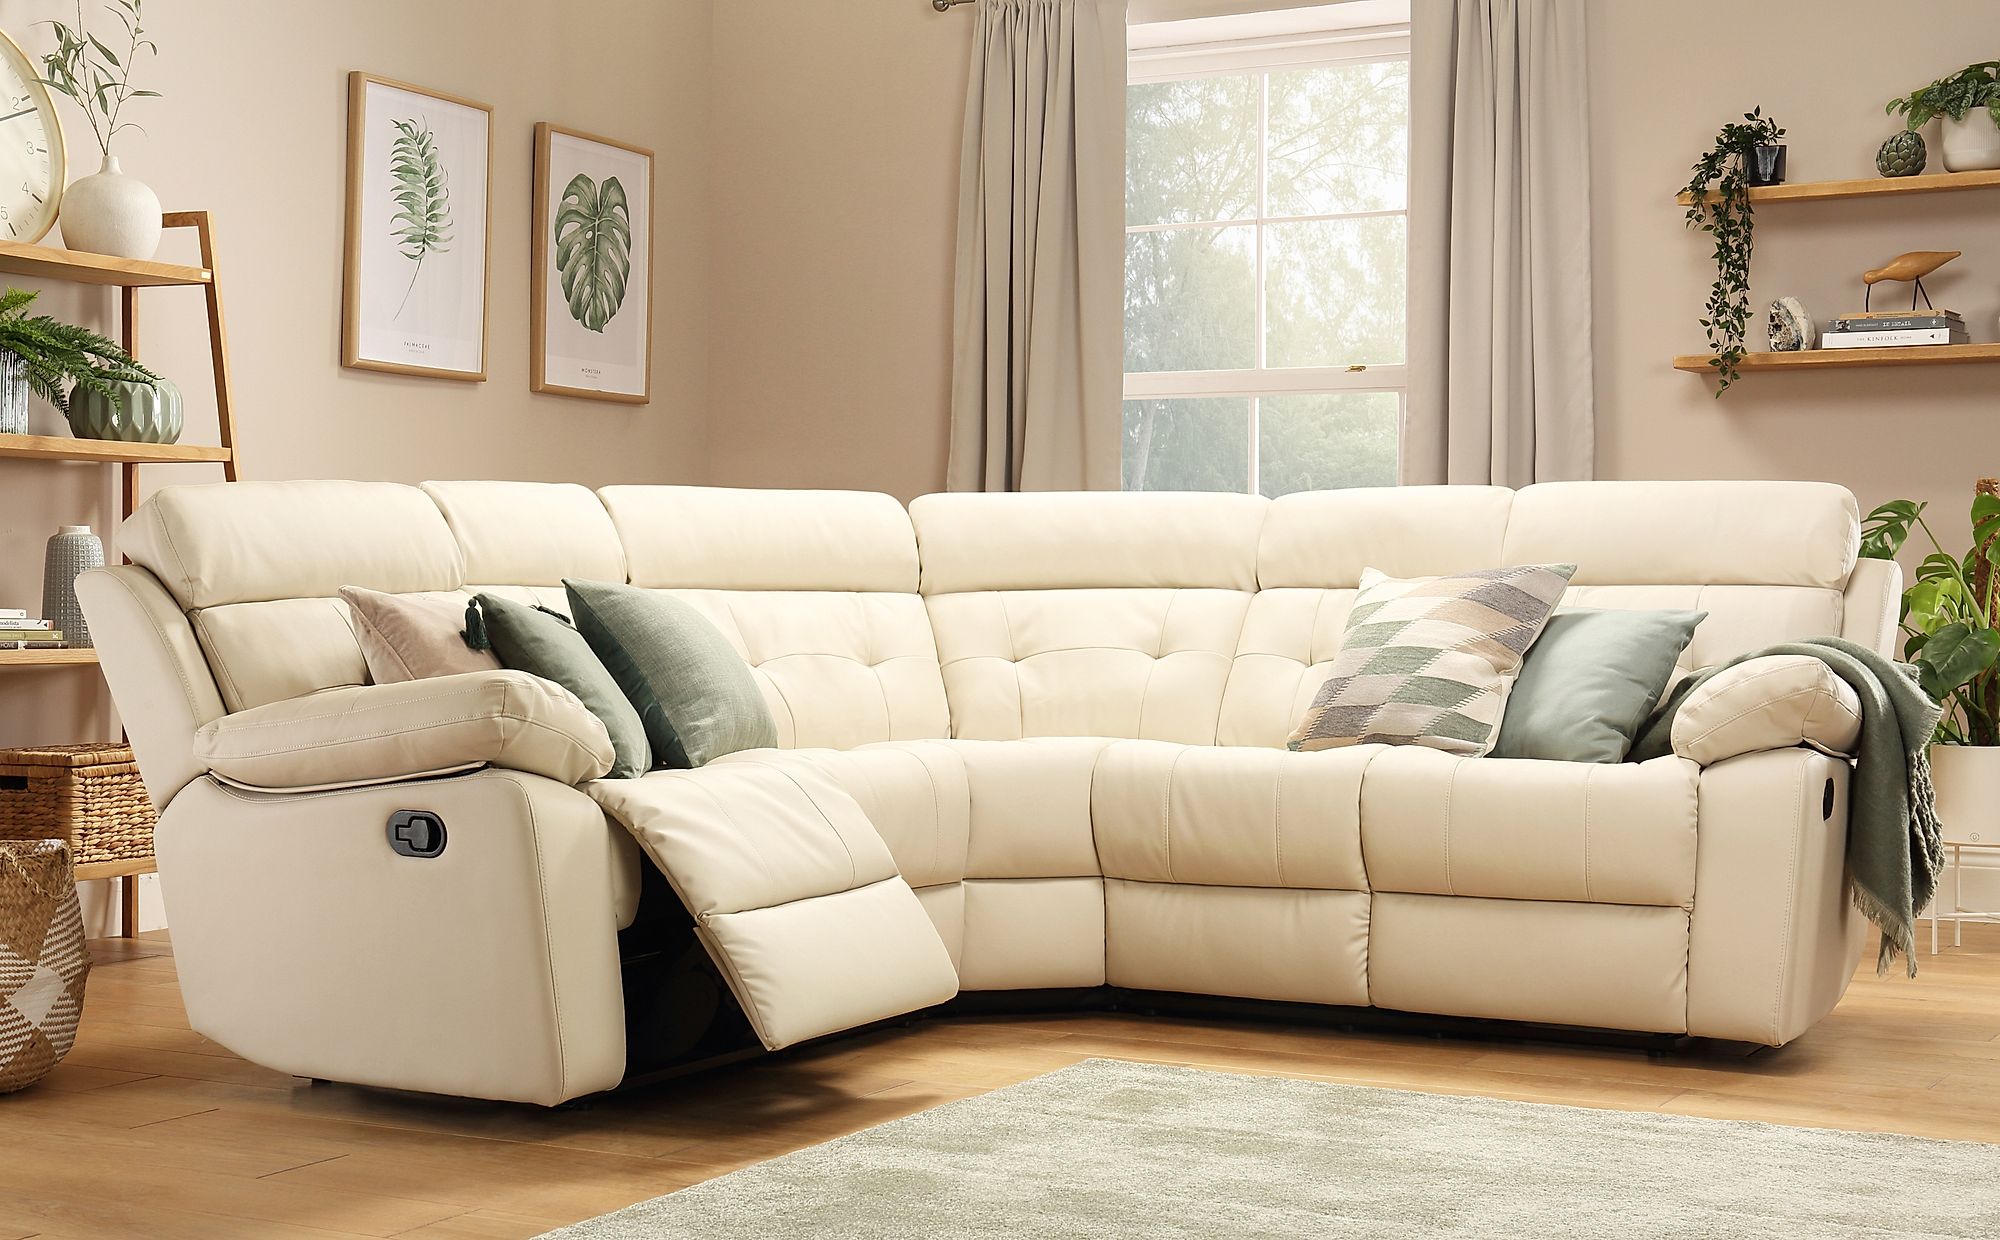 Sofa Covers Quickly Cover Your Old, How To Change Cover Of Sofa